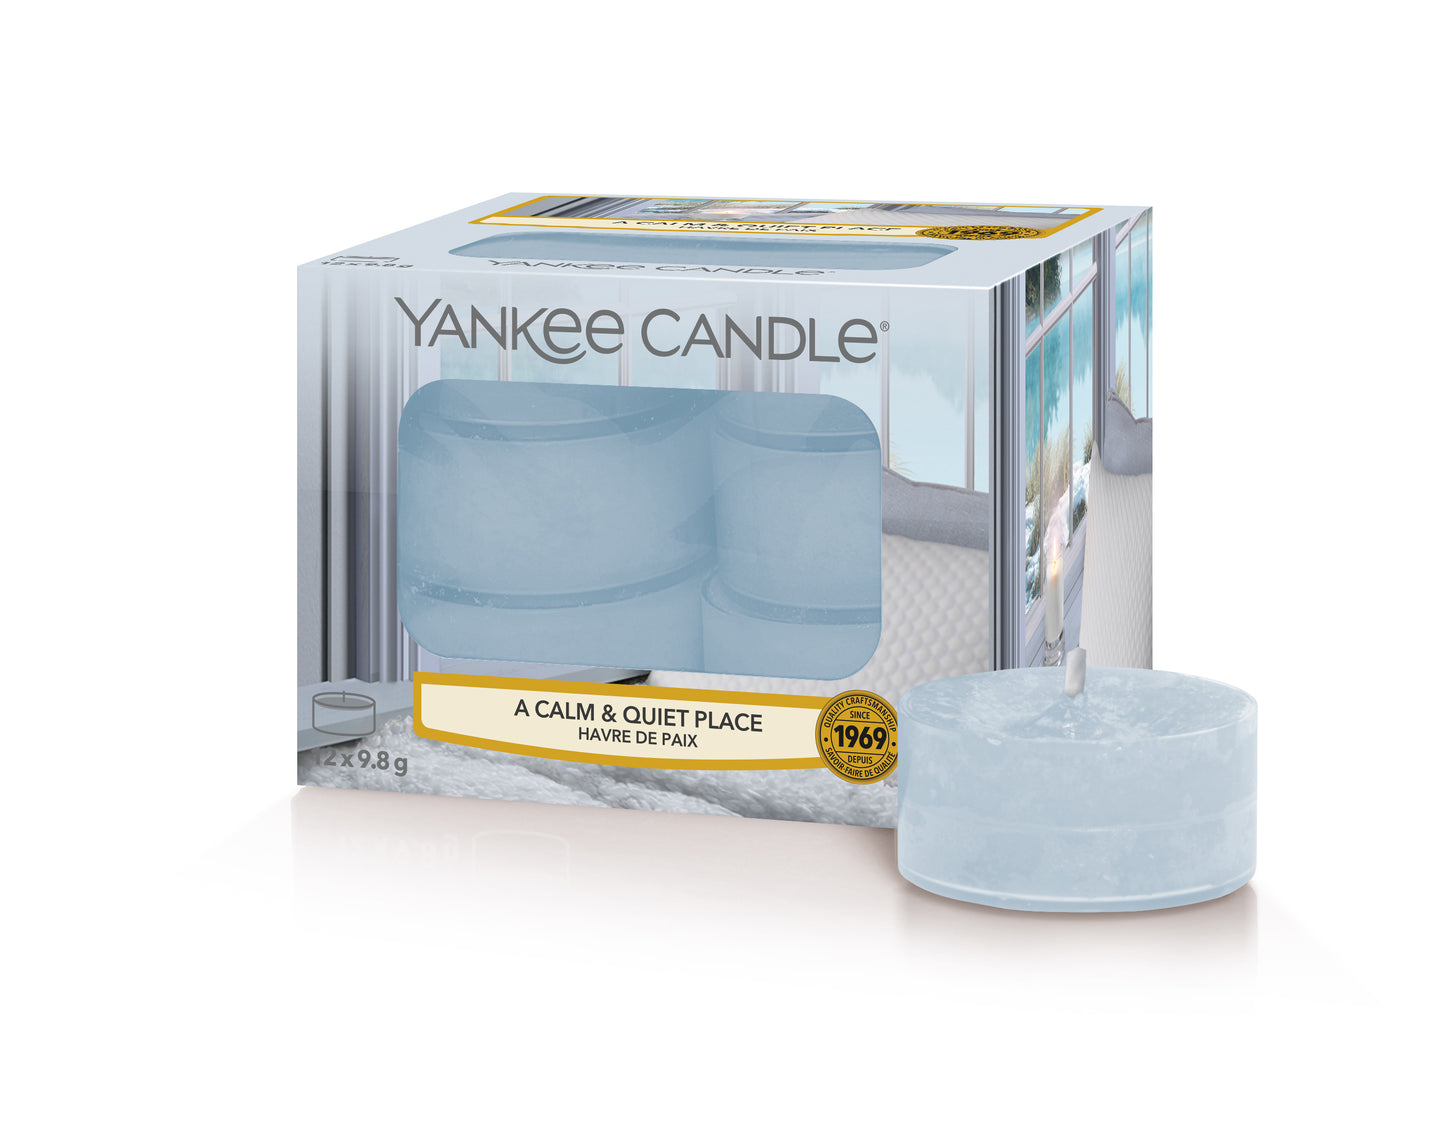 Yankee Candle A Calm & Quiet Place